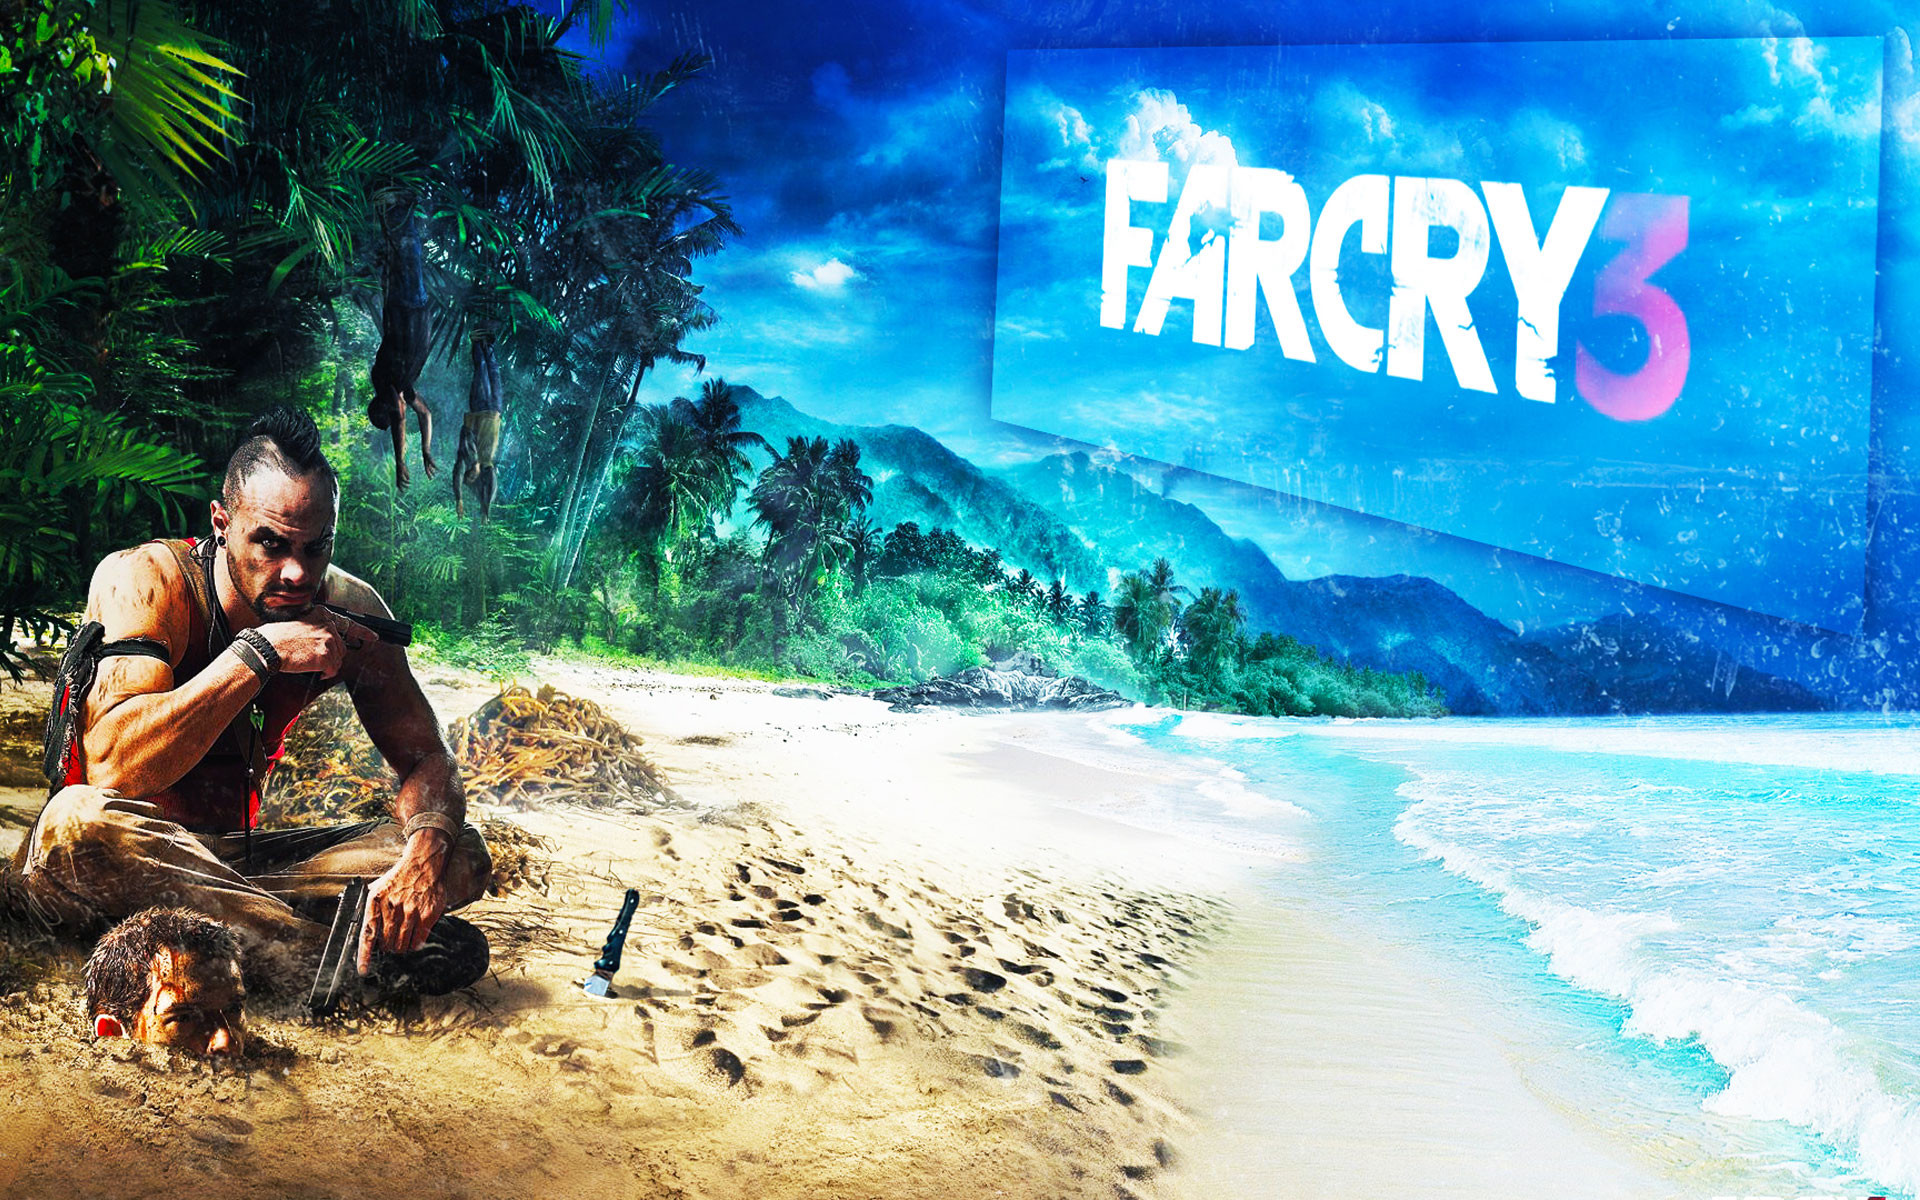 1920x1200 Awesome Far Cry 3 Wallpaper